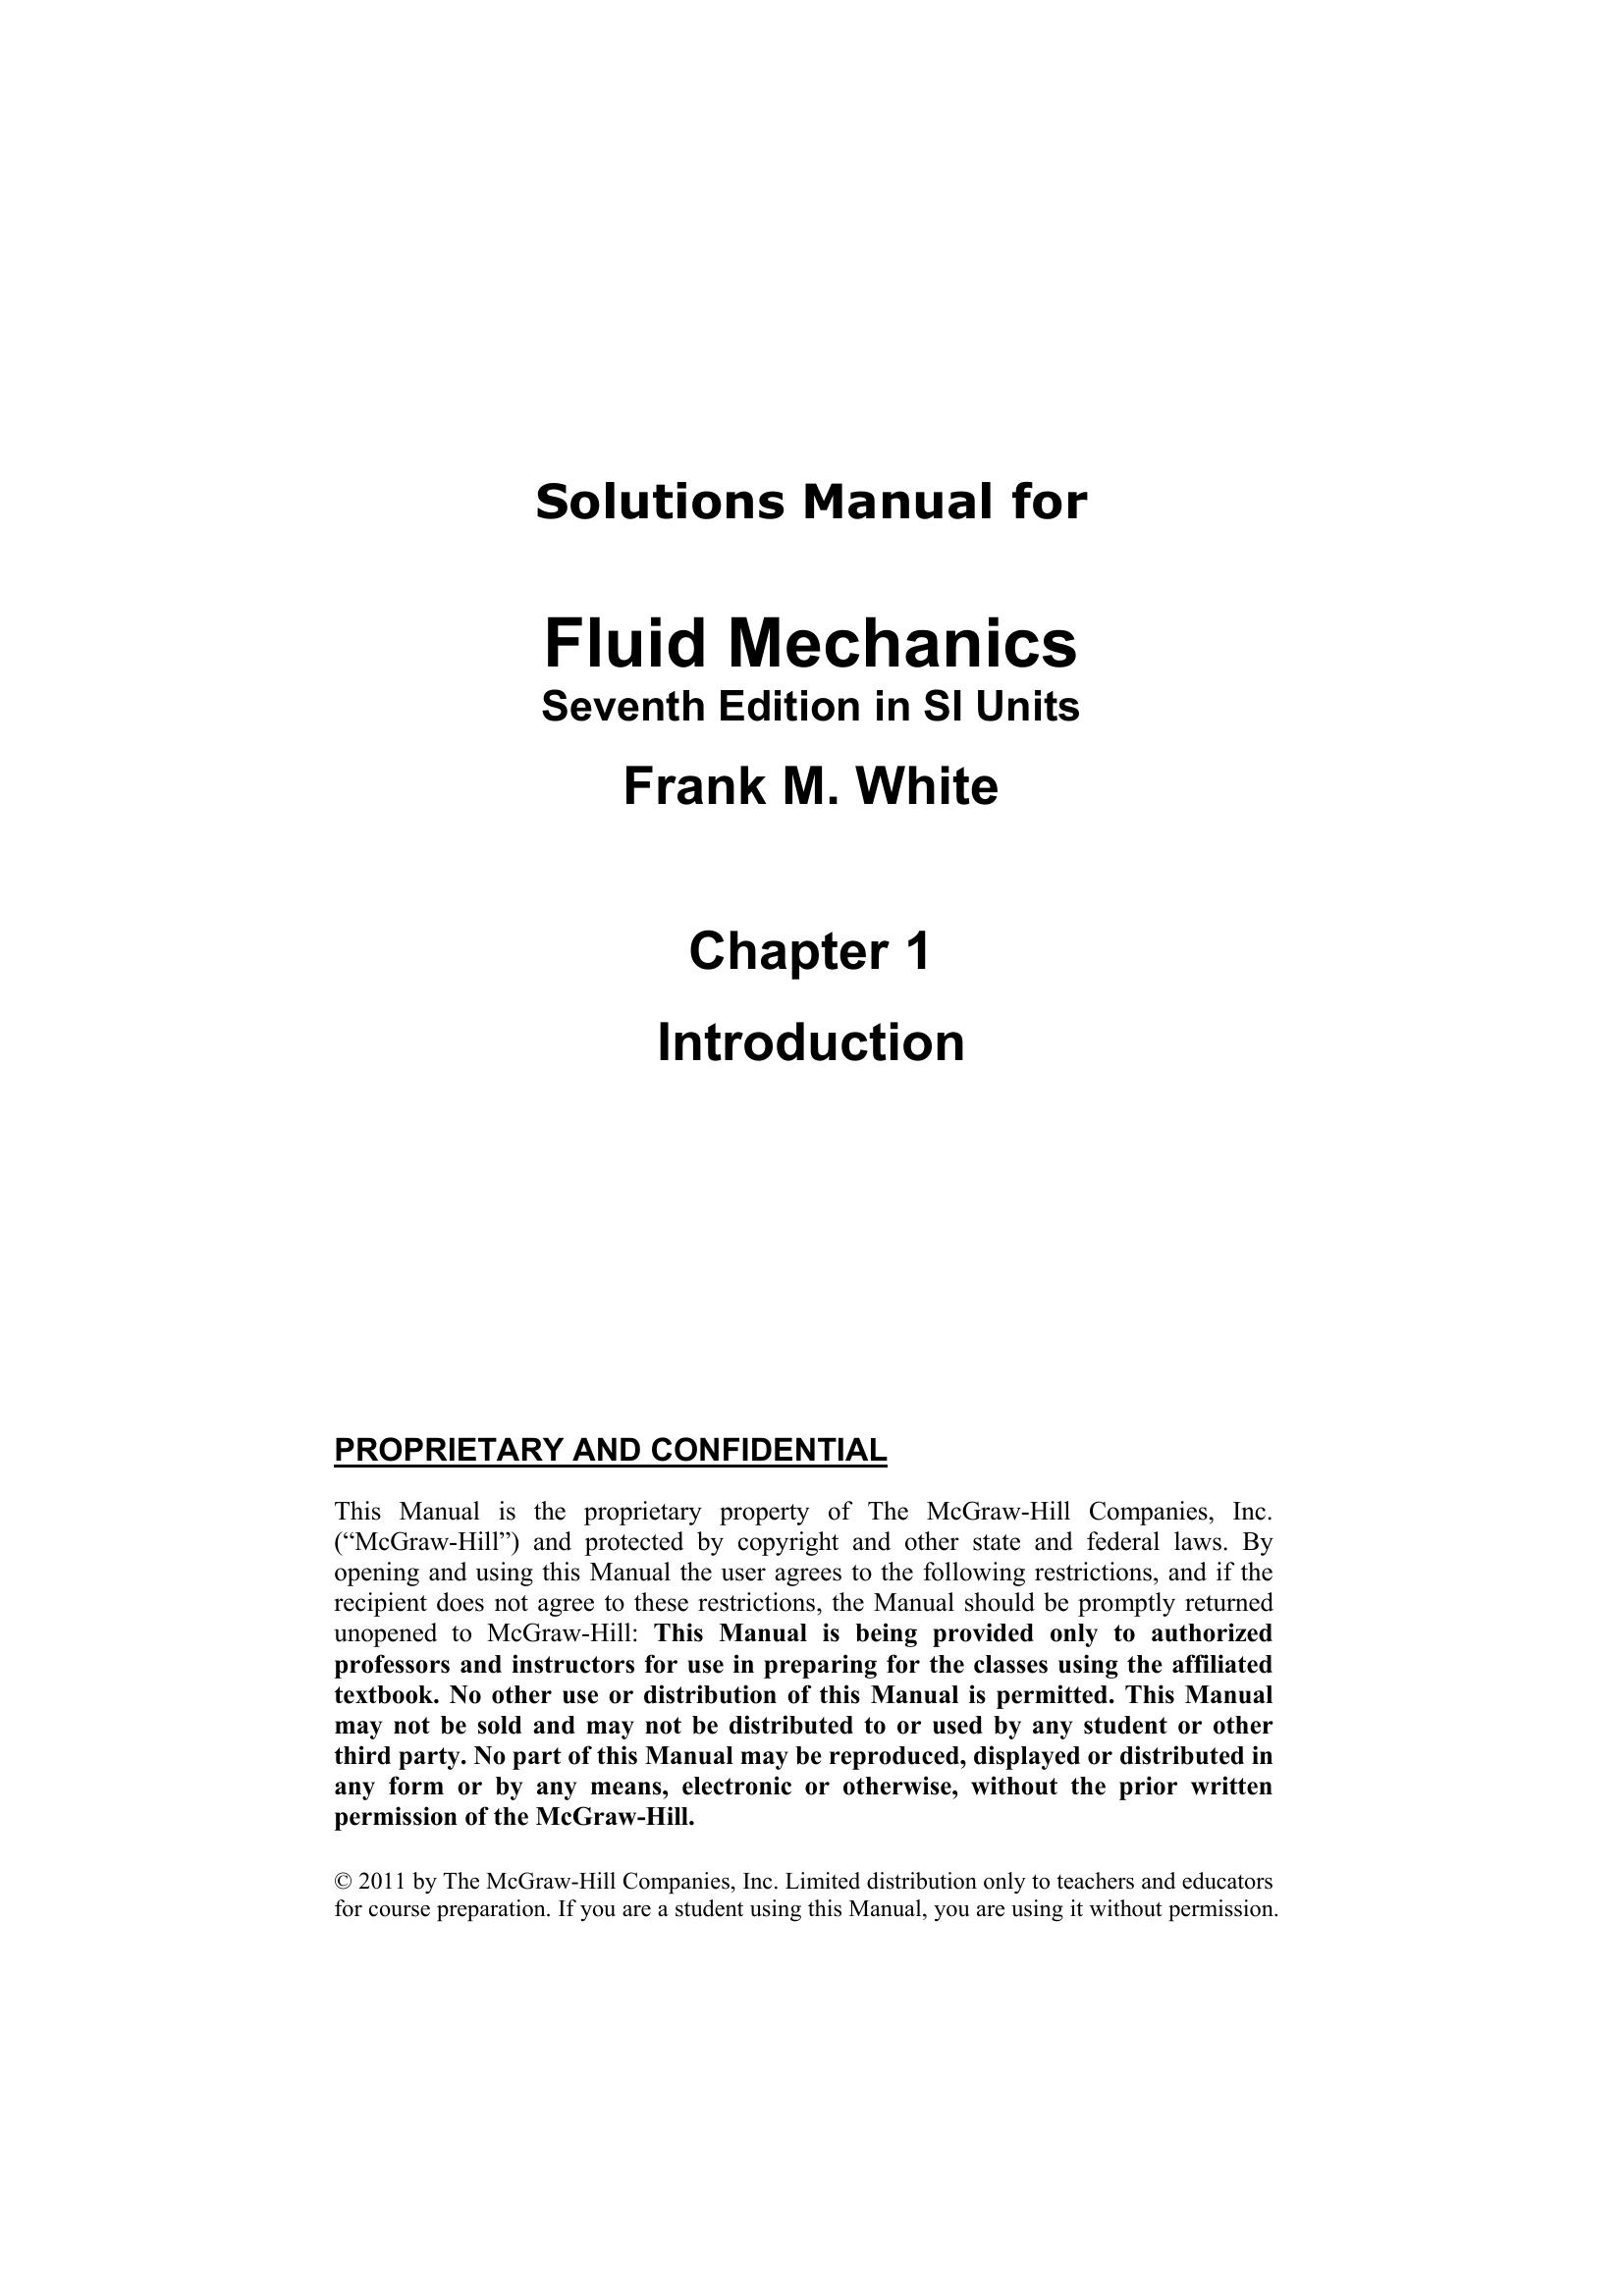 Solution manual to Fluid Mechanics 7th Edition, Frank M. White (Chapter 1)